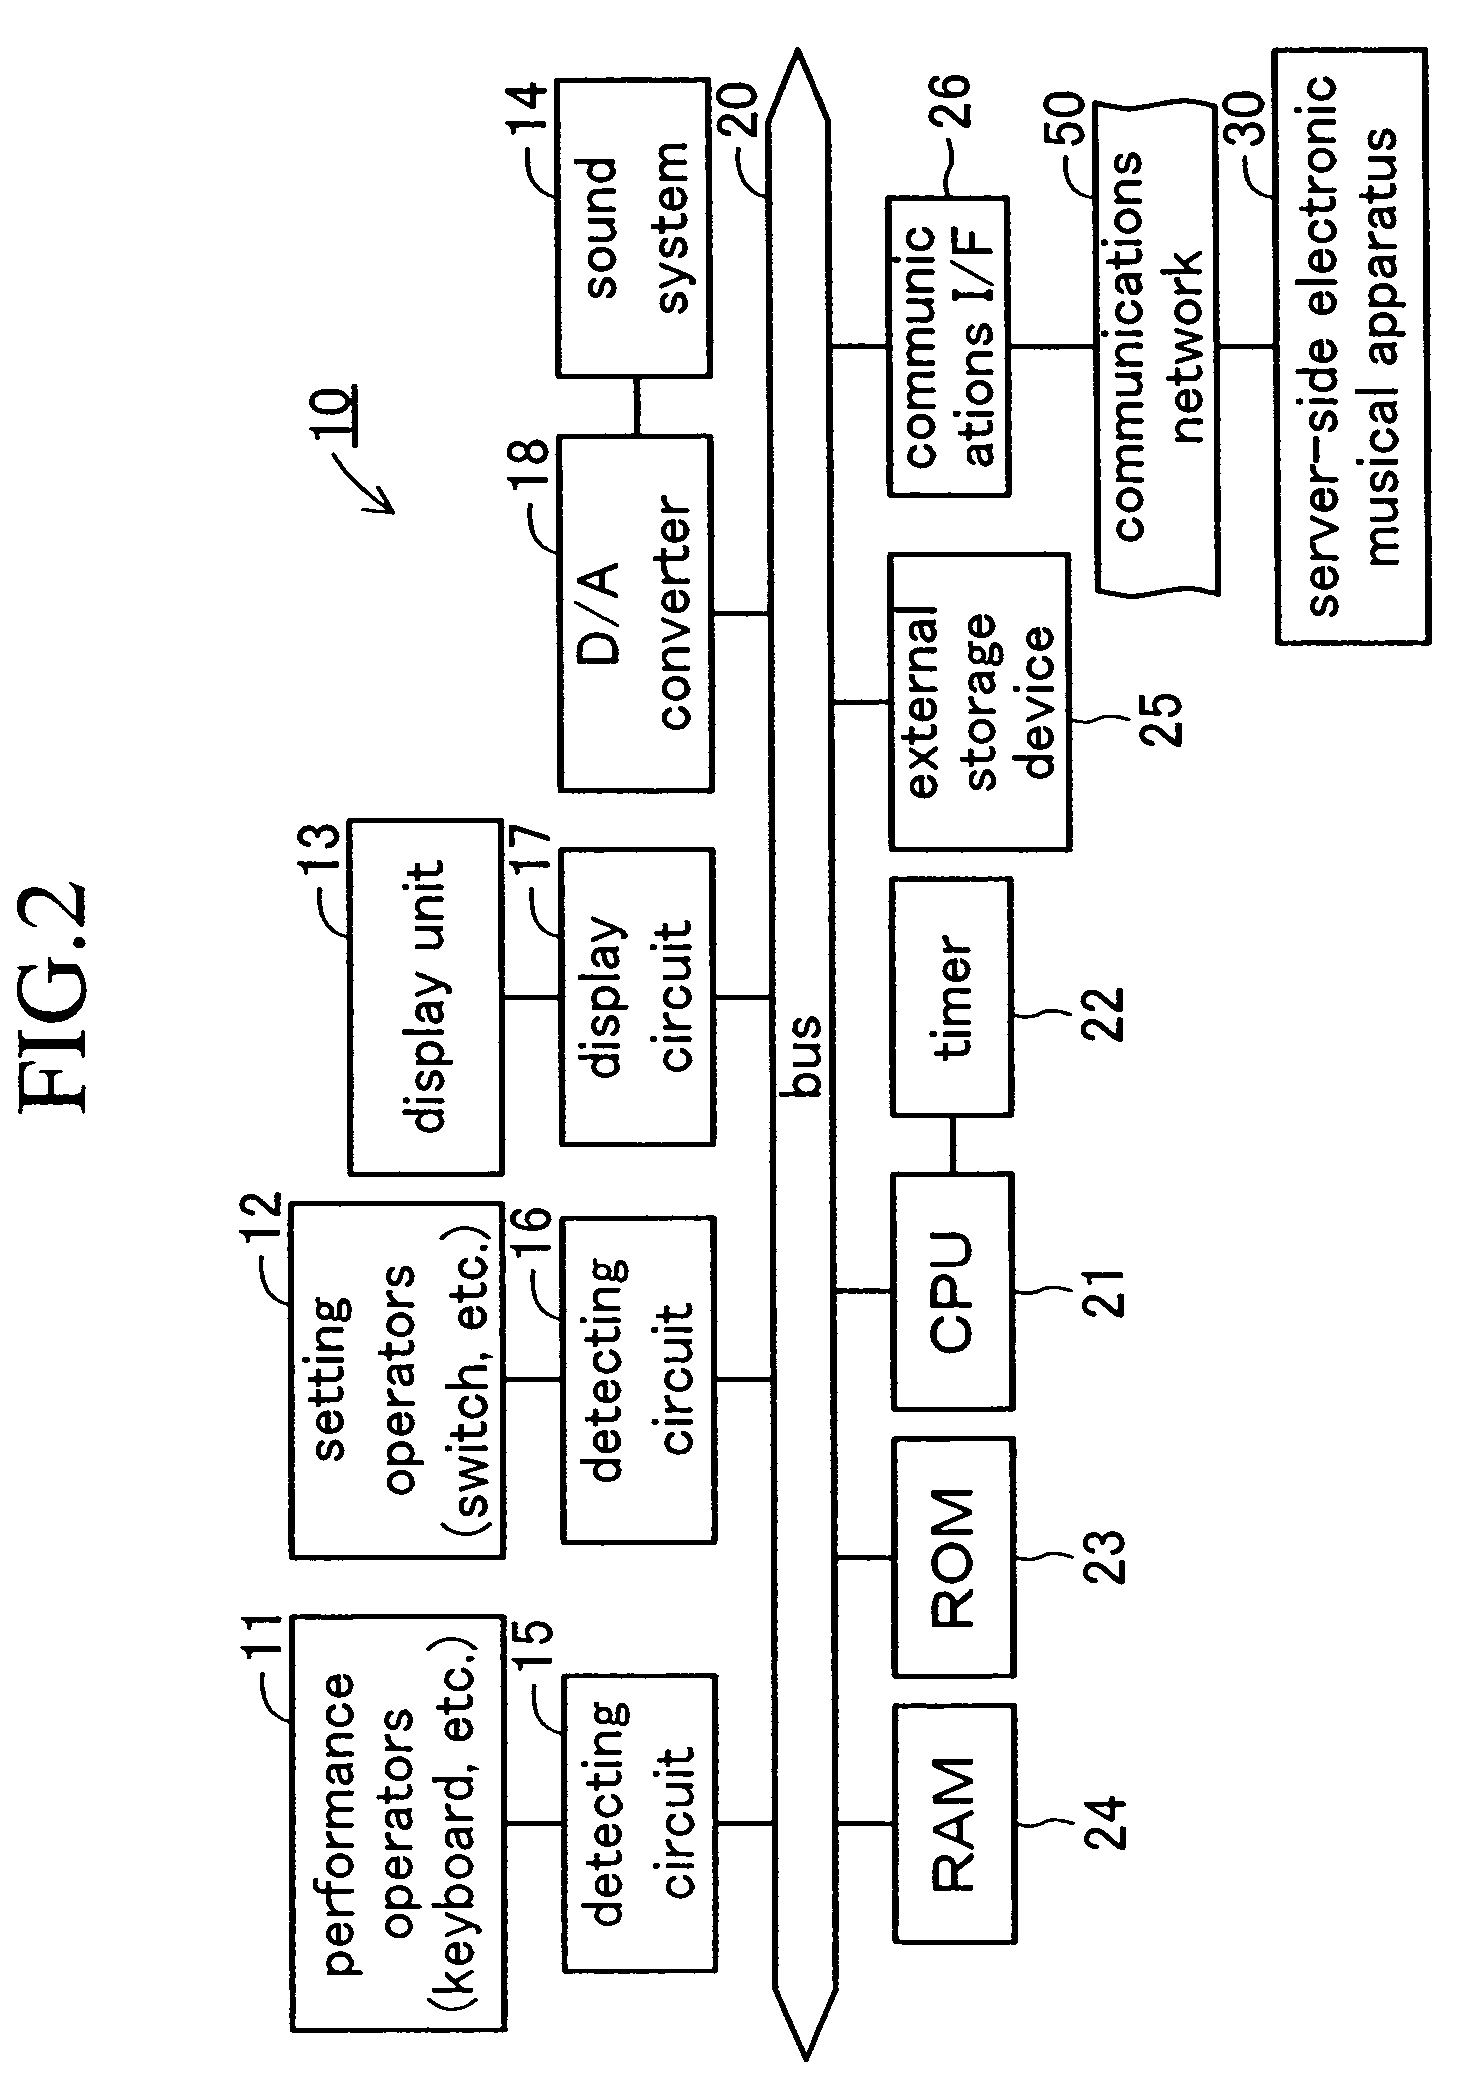 Electronic musical apparatus system, server-side electronic musical apparatus and client-side electronic musical apparatus